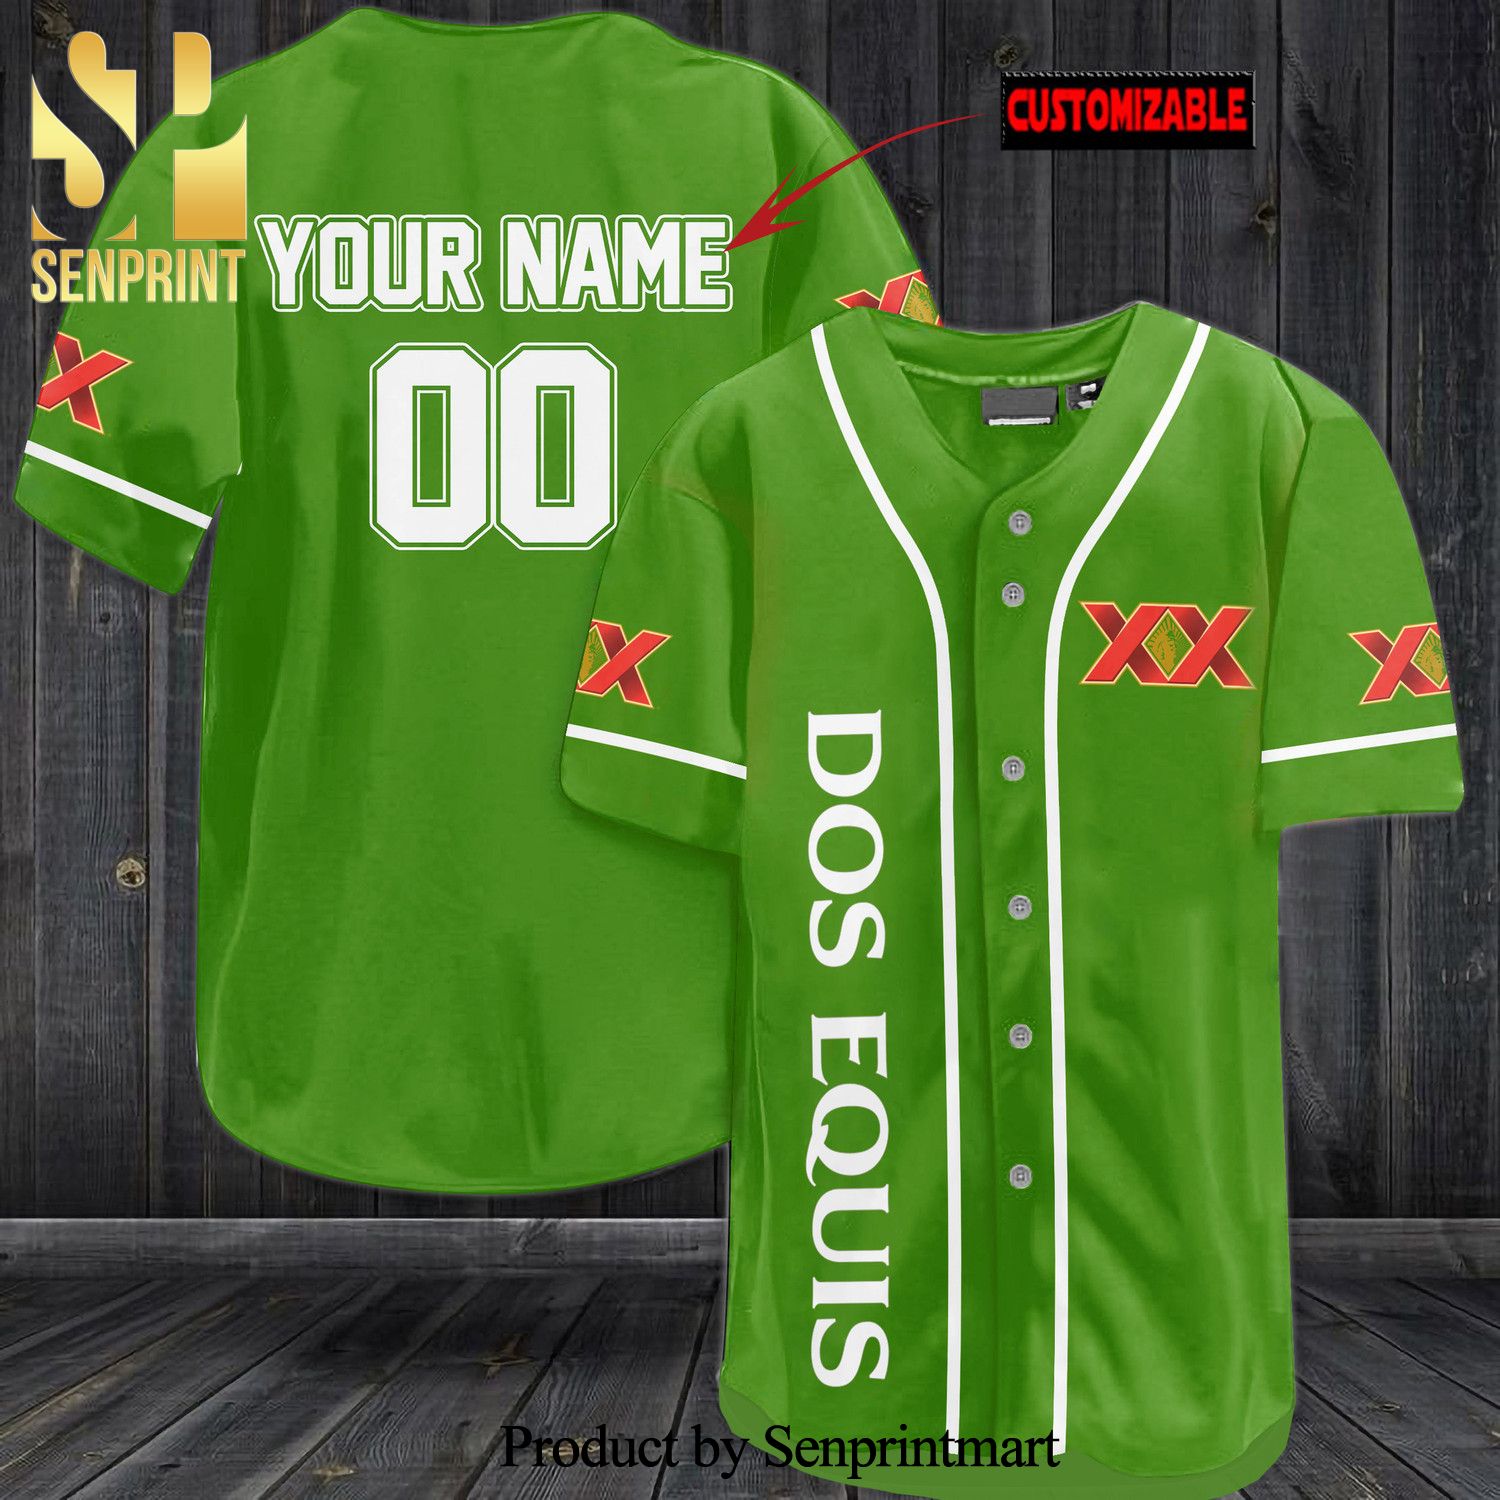 Personalized Dos Equis All Over Print Unisex Baseball Jersey – Lime Green